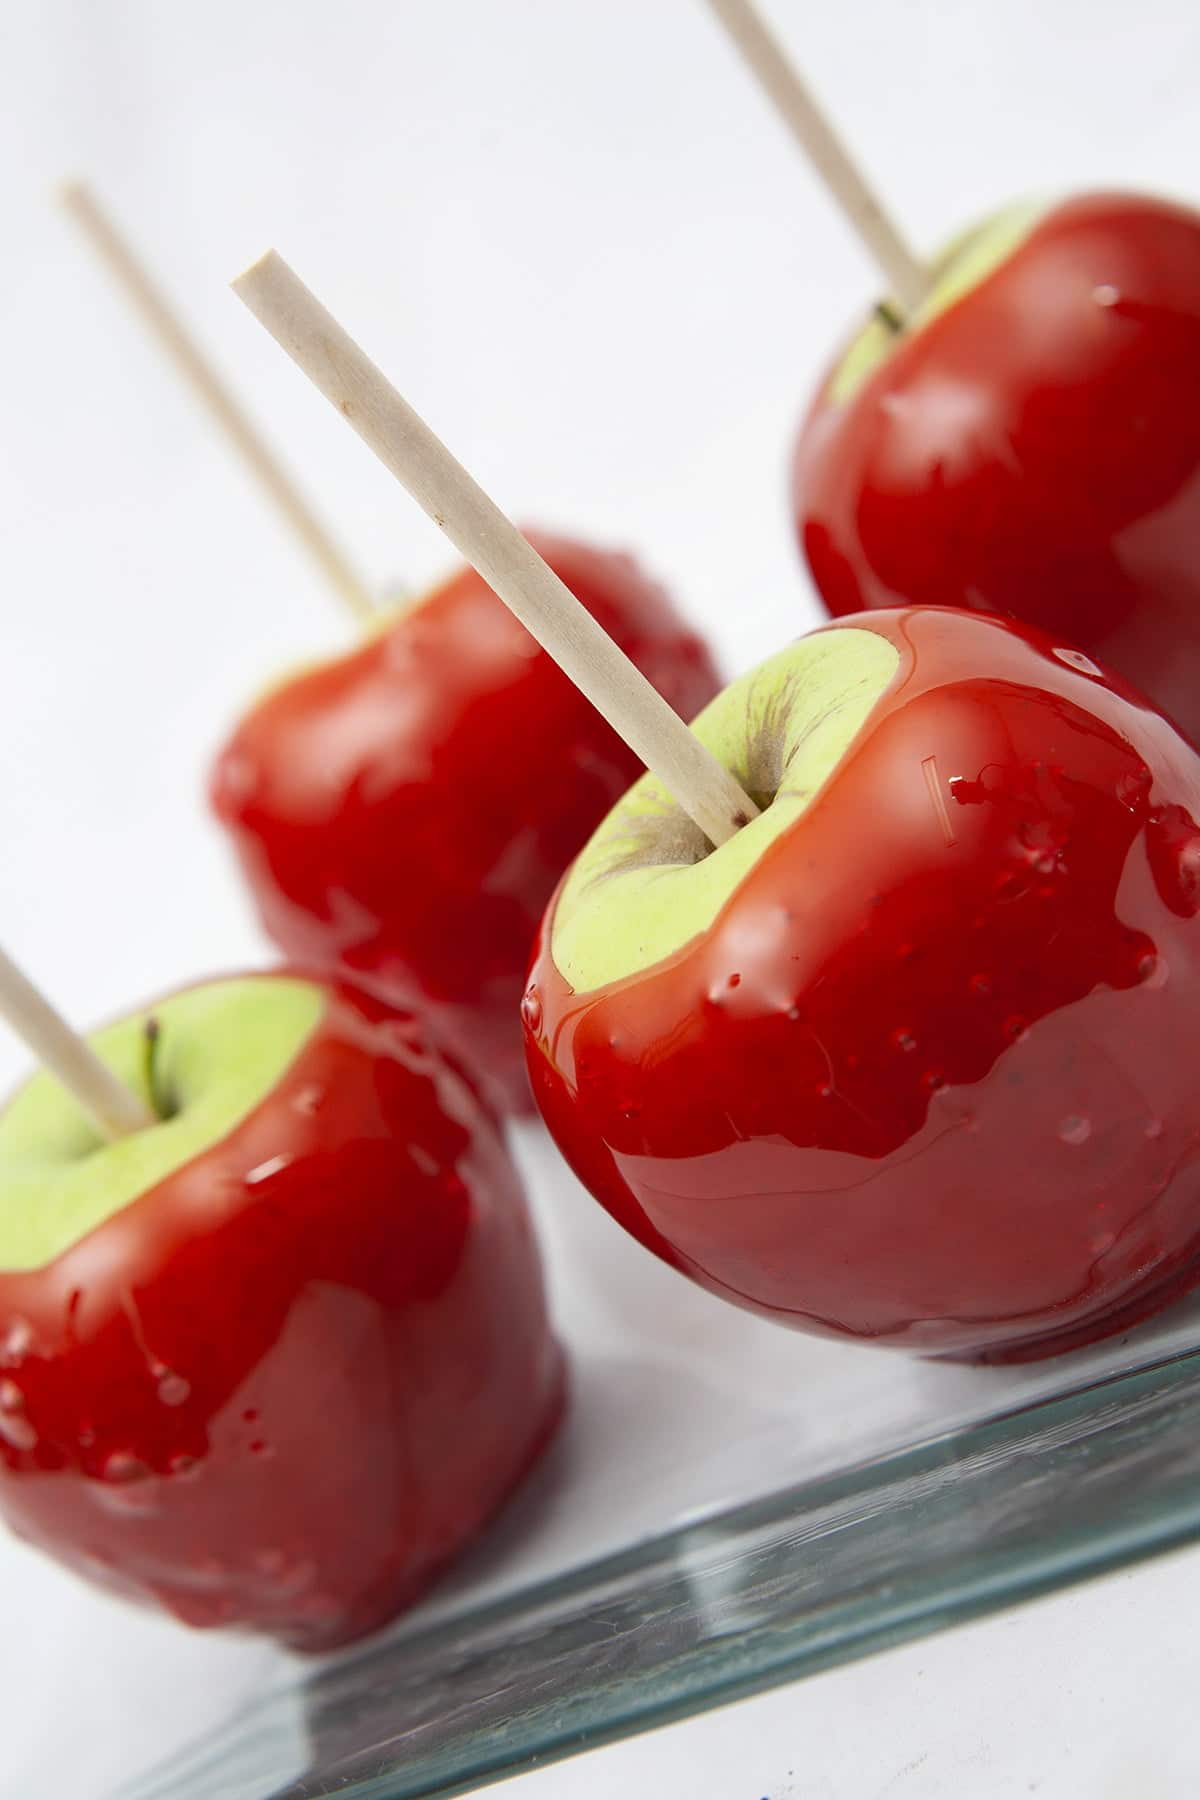 A square shaped glass plate with 4 Candy Apples on it. The apples are green - Granny Smith - and the candy dip on them is a bright shiny red.